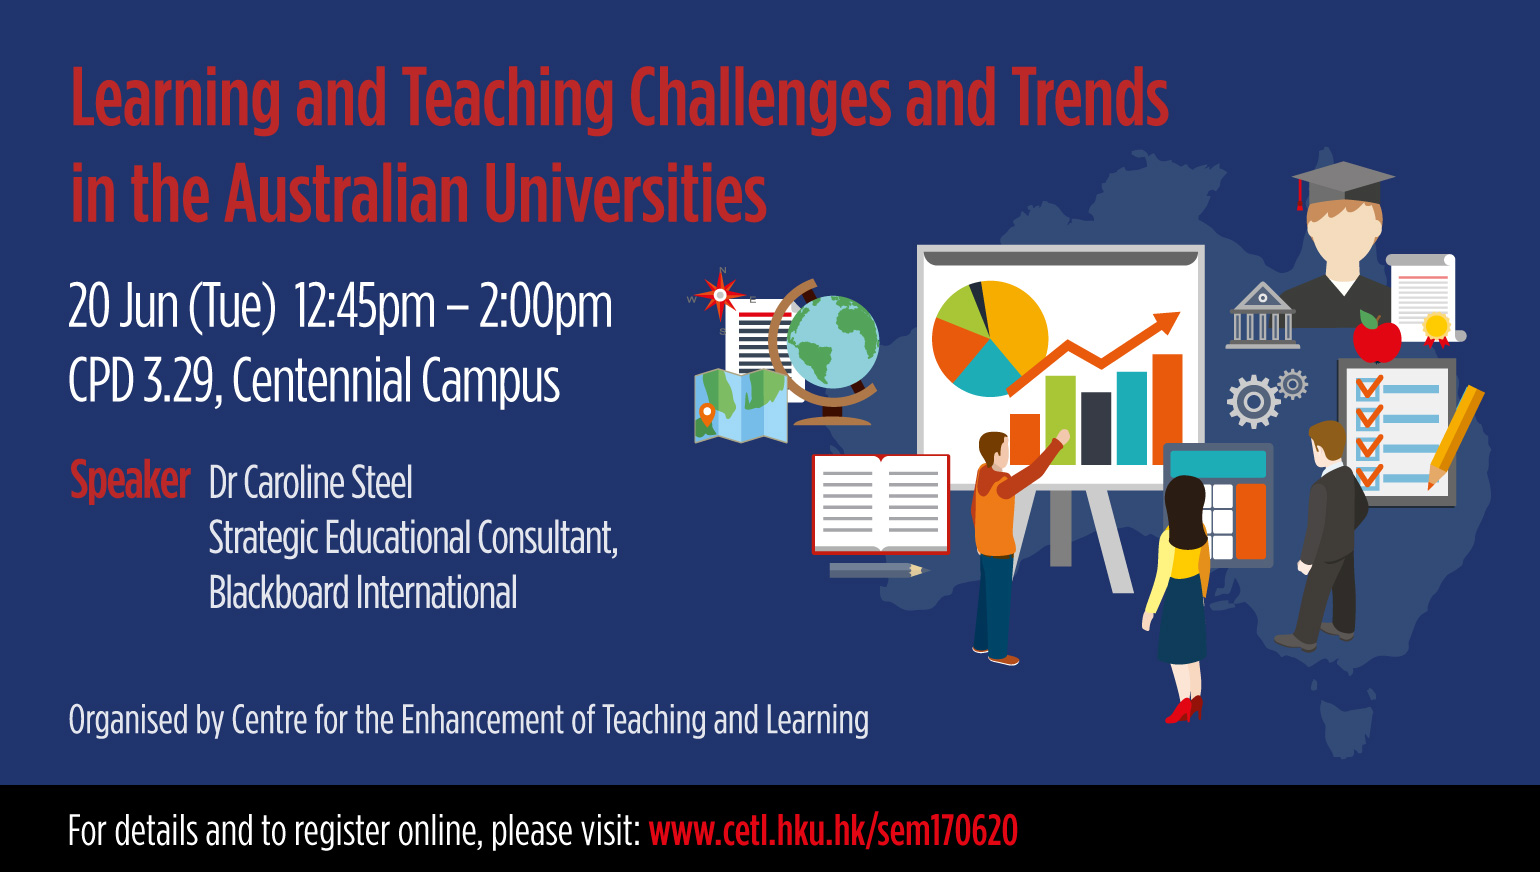  Learning and Teaching Challenges and Trends in the Australian Universities